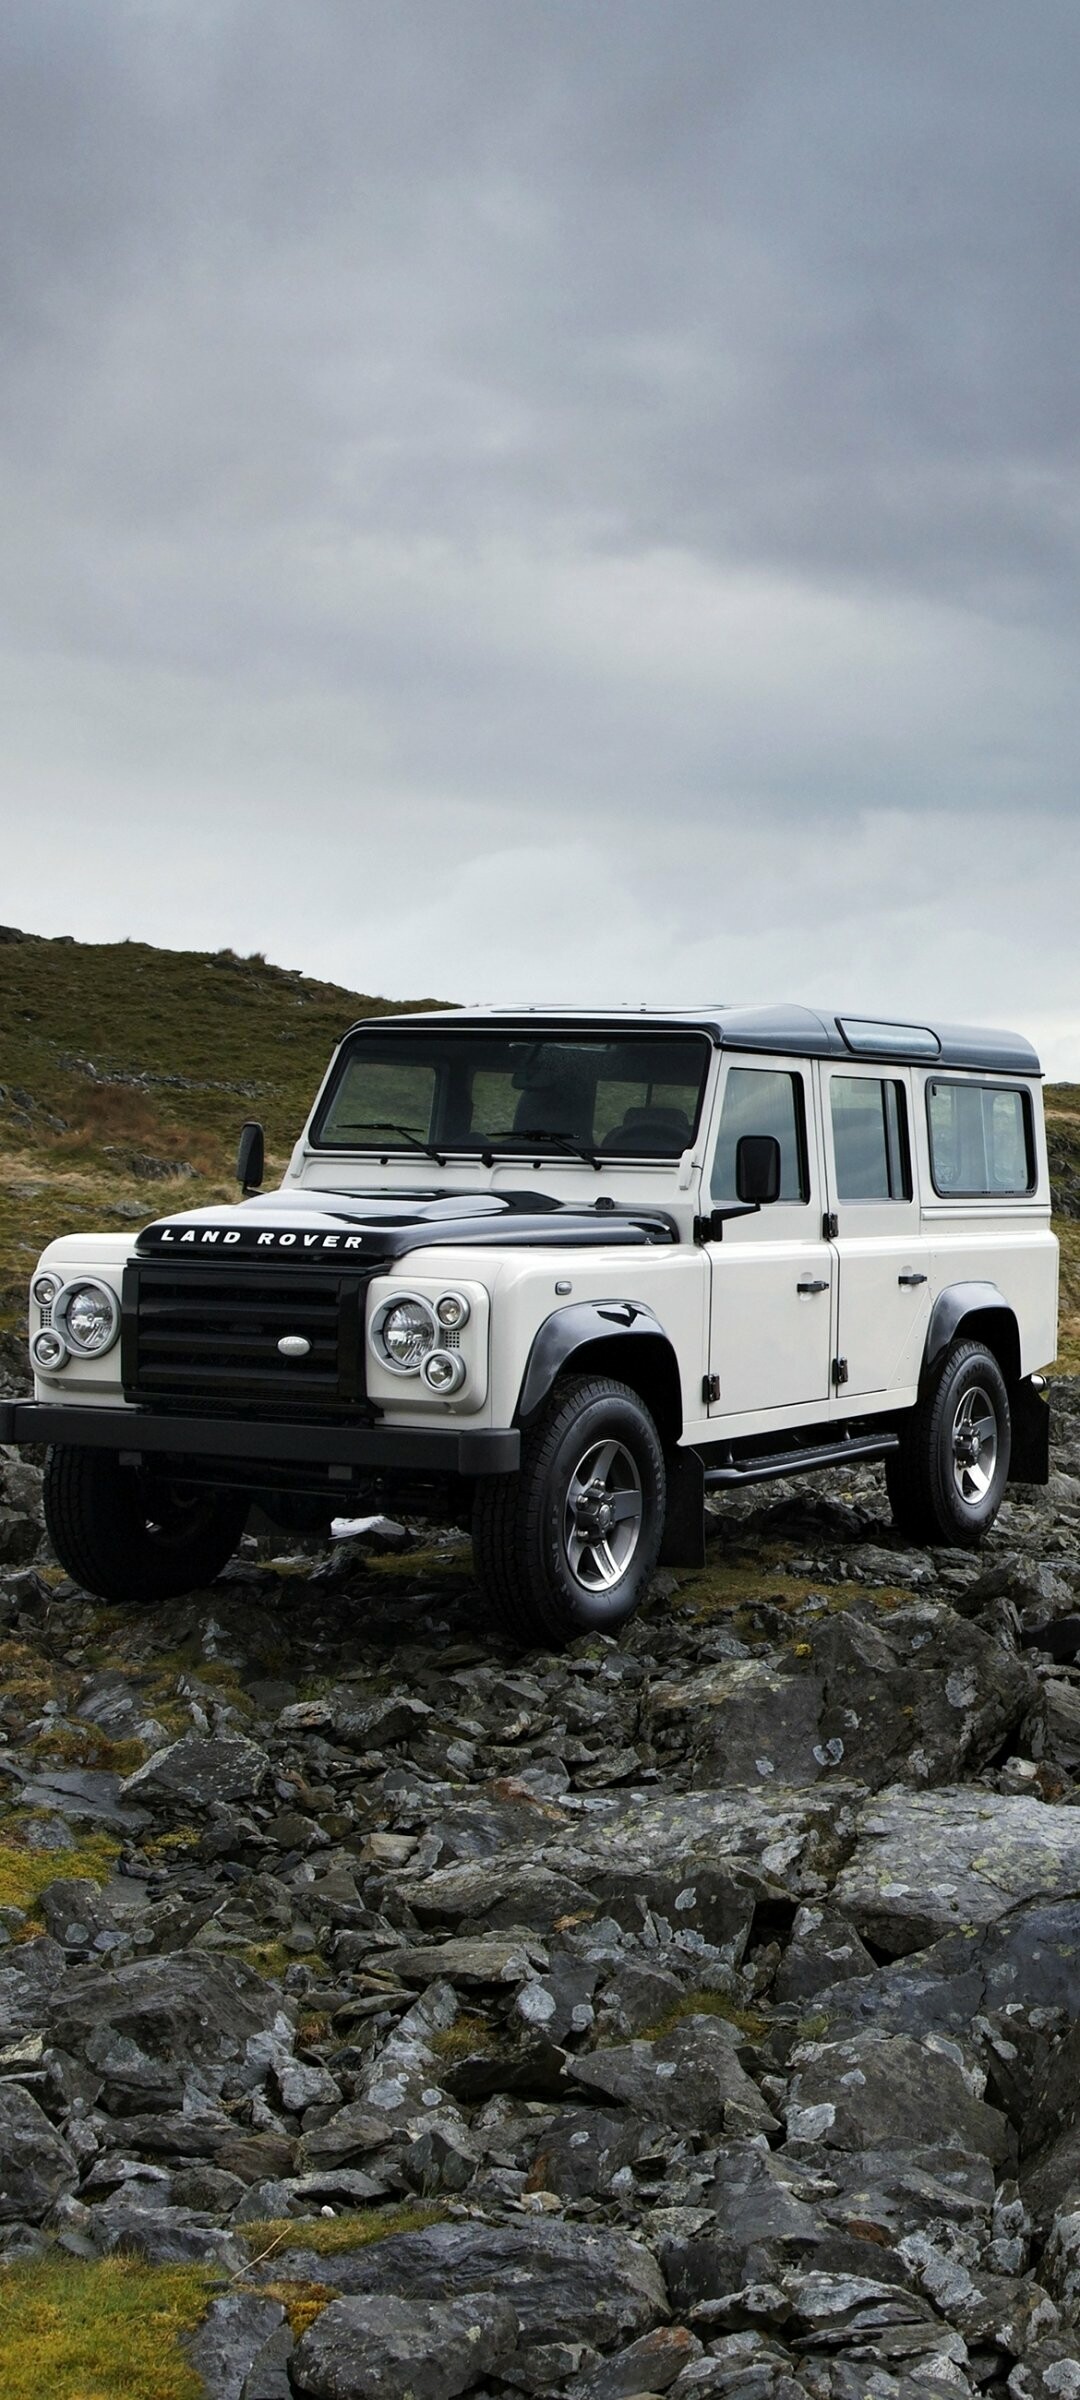 Land Rover: Defender, The first vehicle was officially launched 30 April 1948, at the Amsterdam Motor Show. 1080x2400 HD Background.